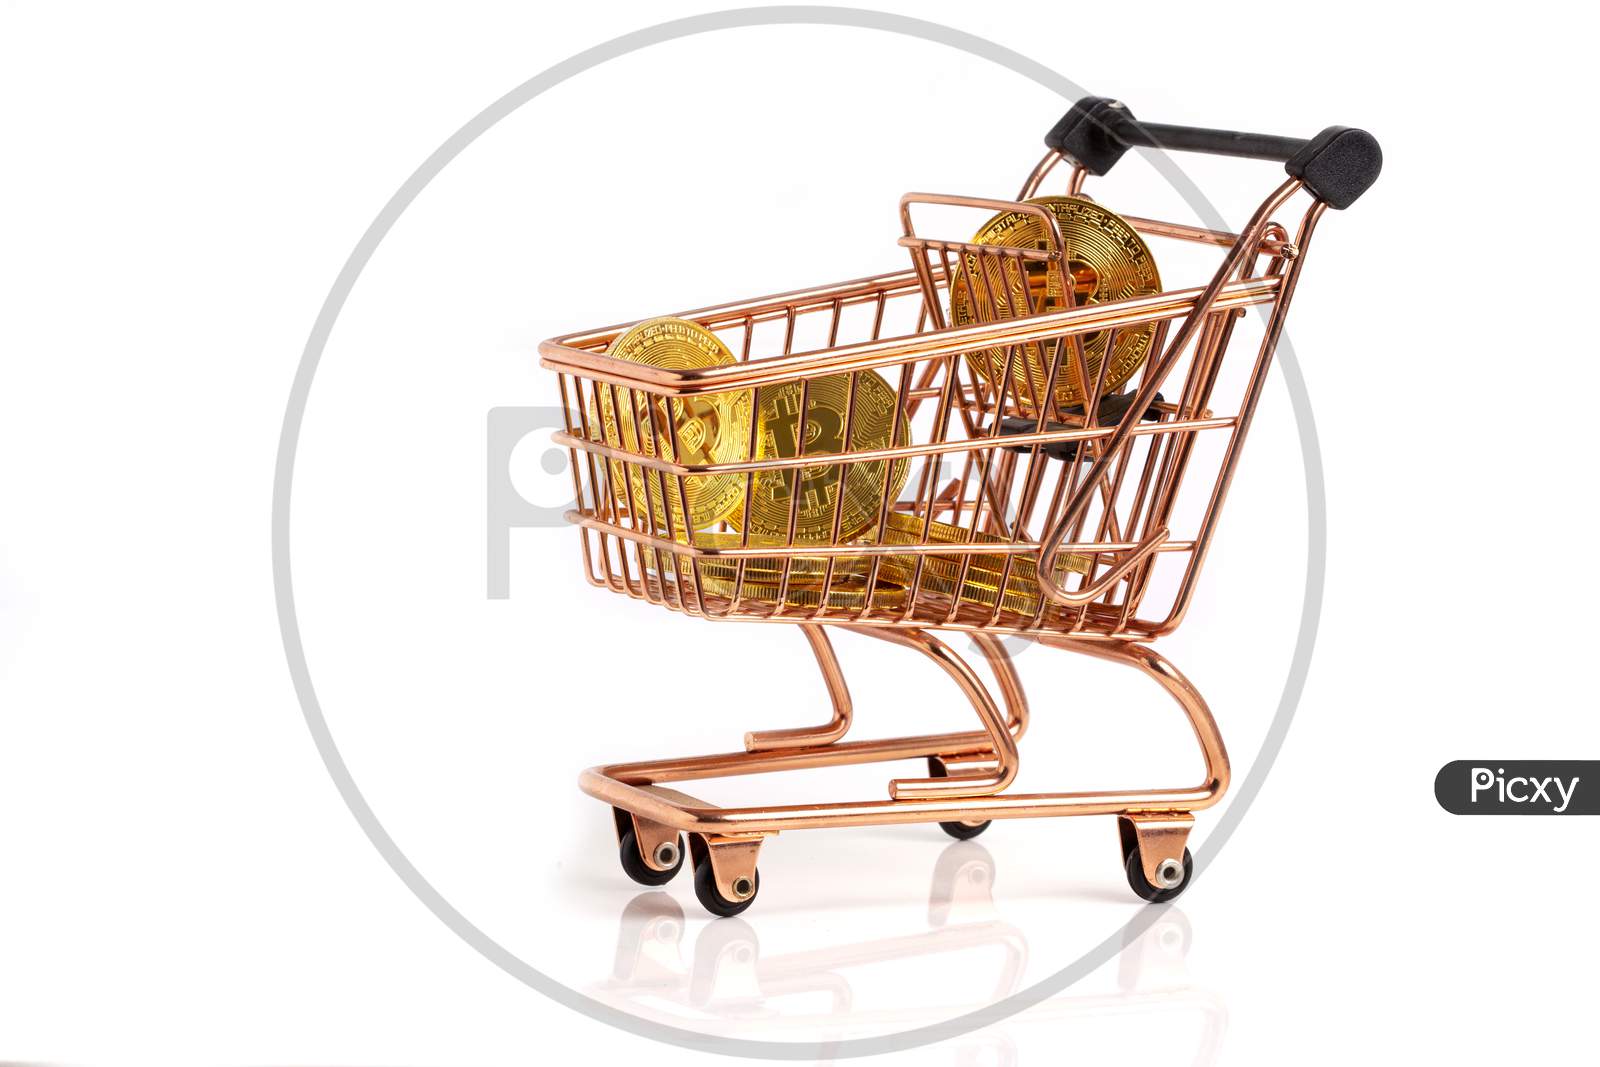 Cryptocurrency Shopping Cart Basket